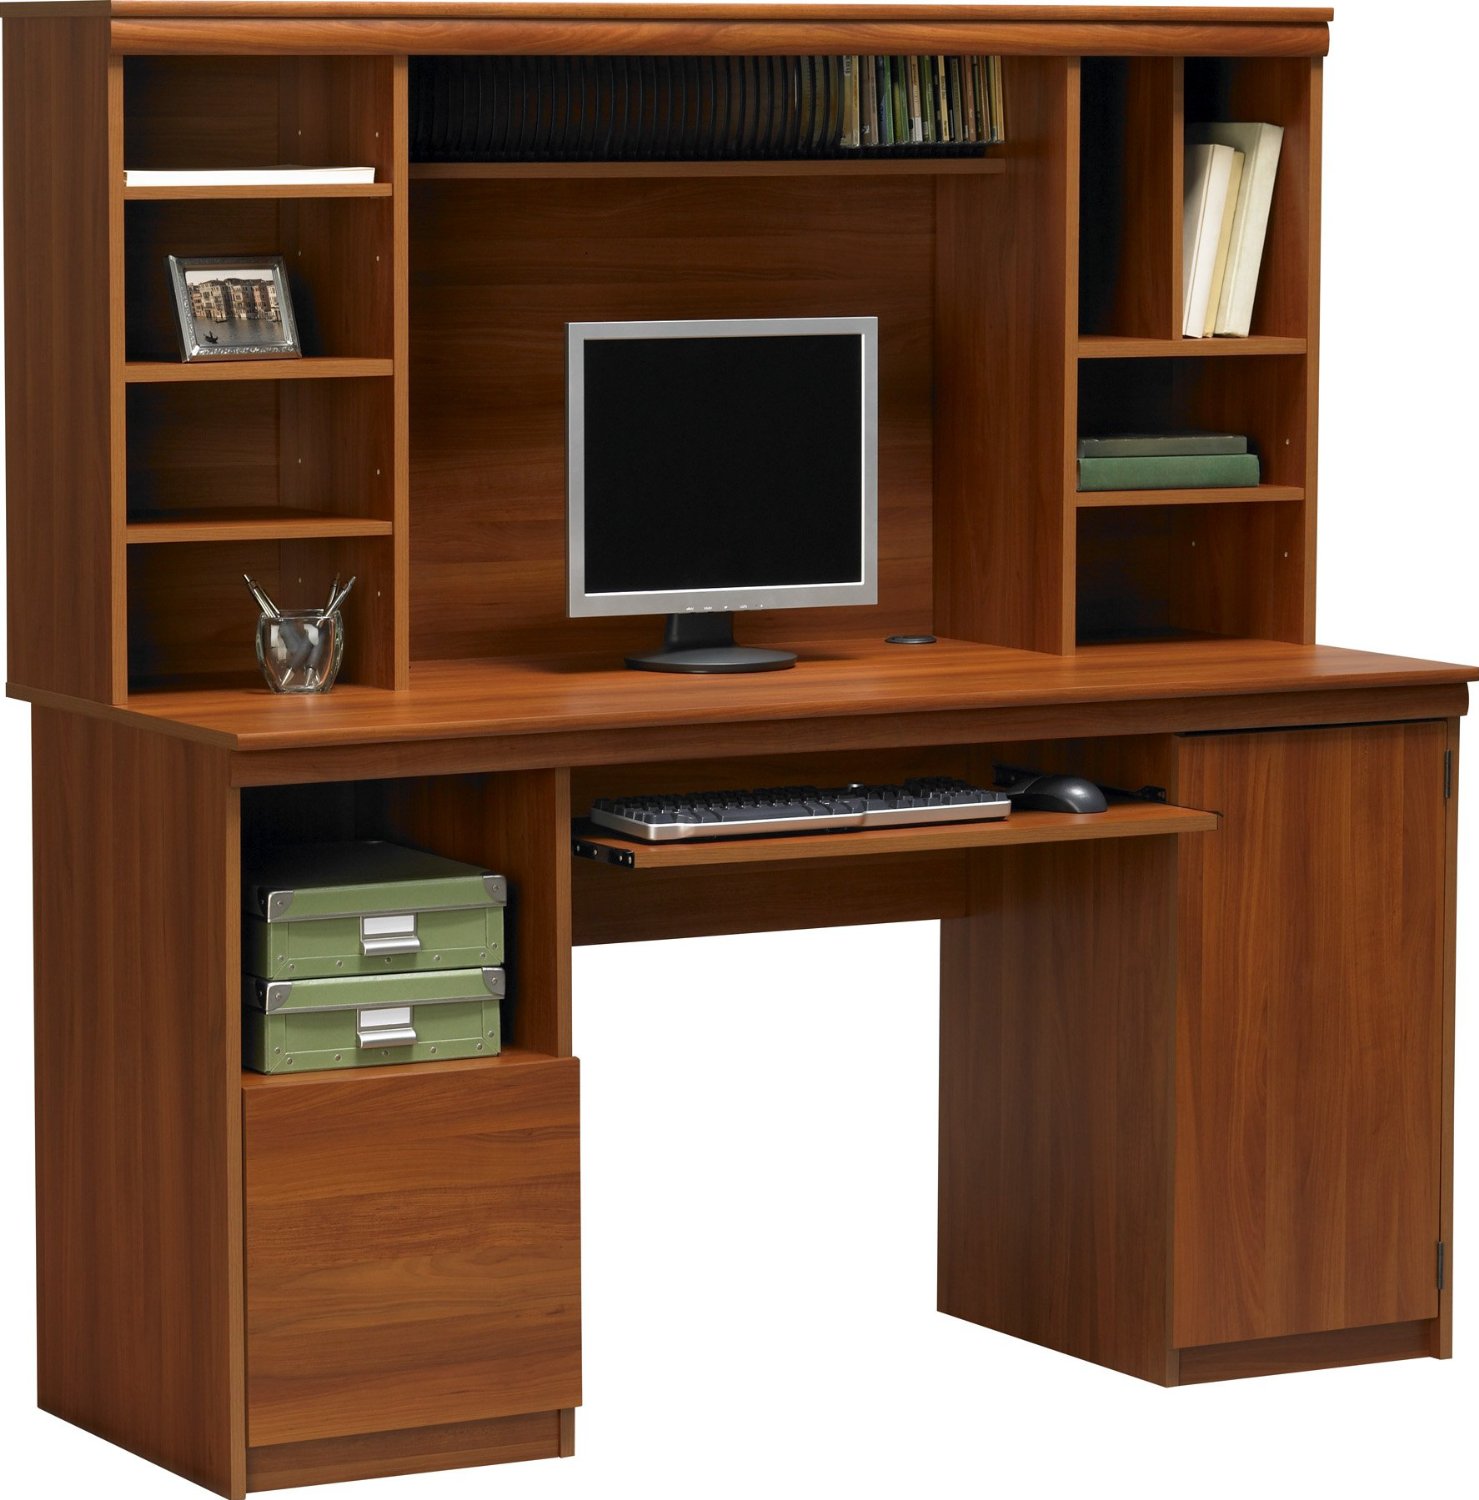 Ameriwood Expert Plum Work Center with Hutch  $179.99